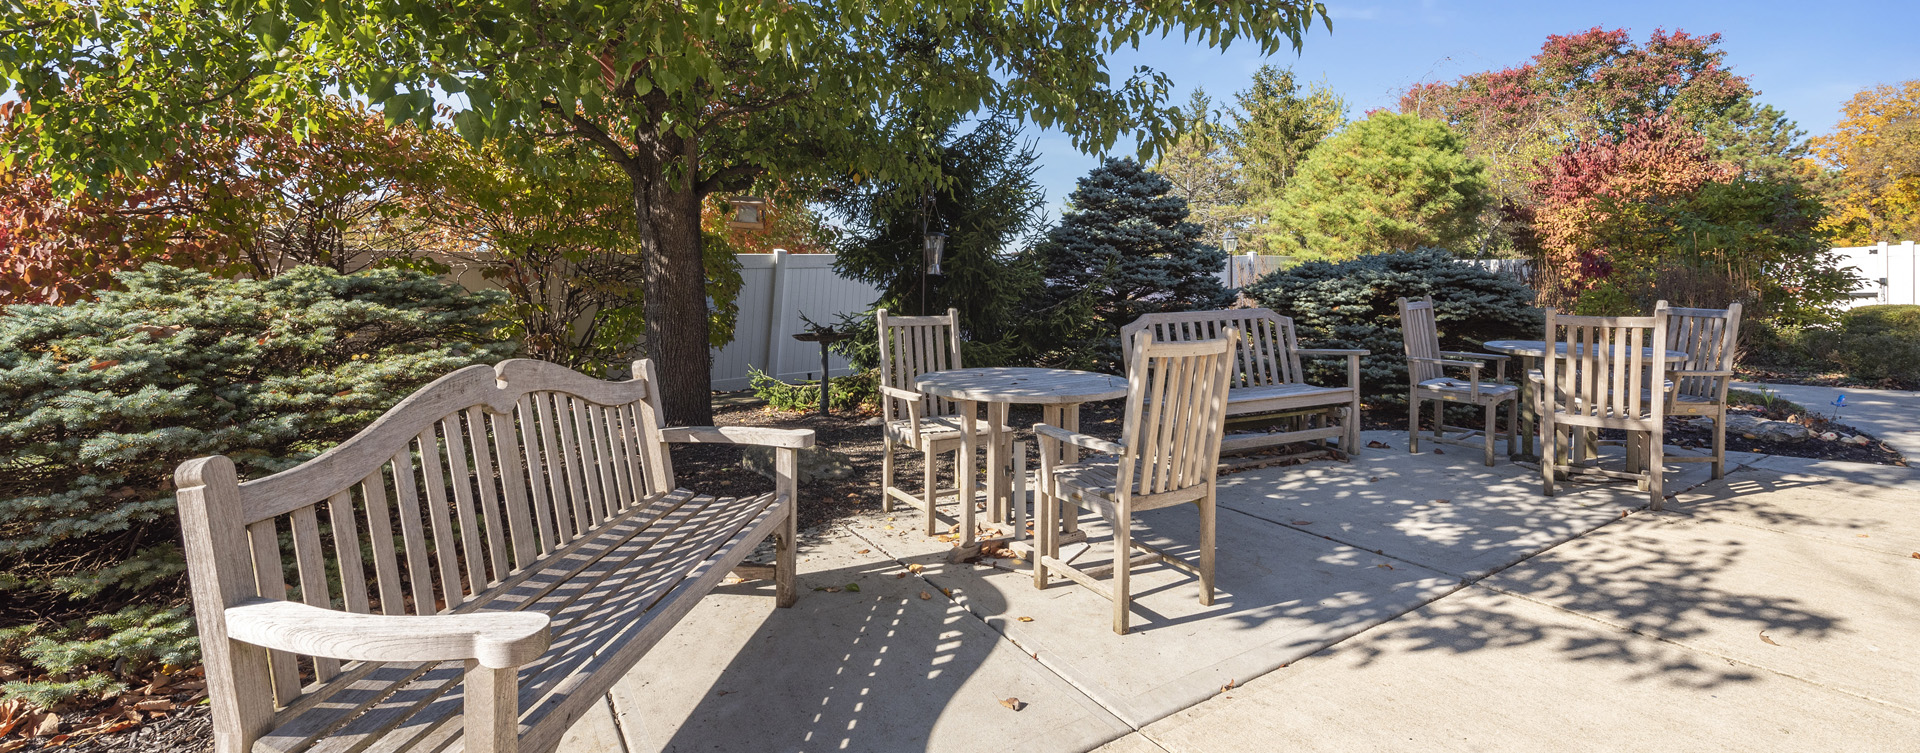 Residents with dementia can enjoy a traveling path, relaxed seating and raised garden beds in the courtyard at Bickford of Worthington